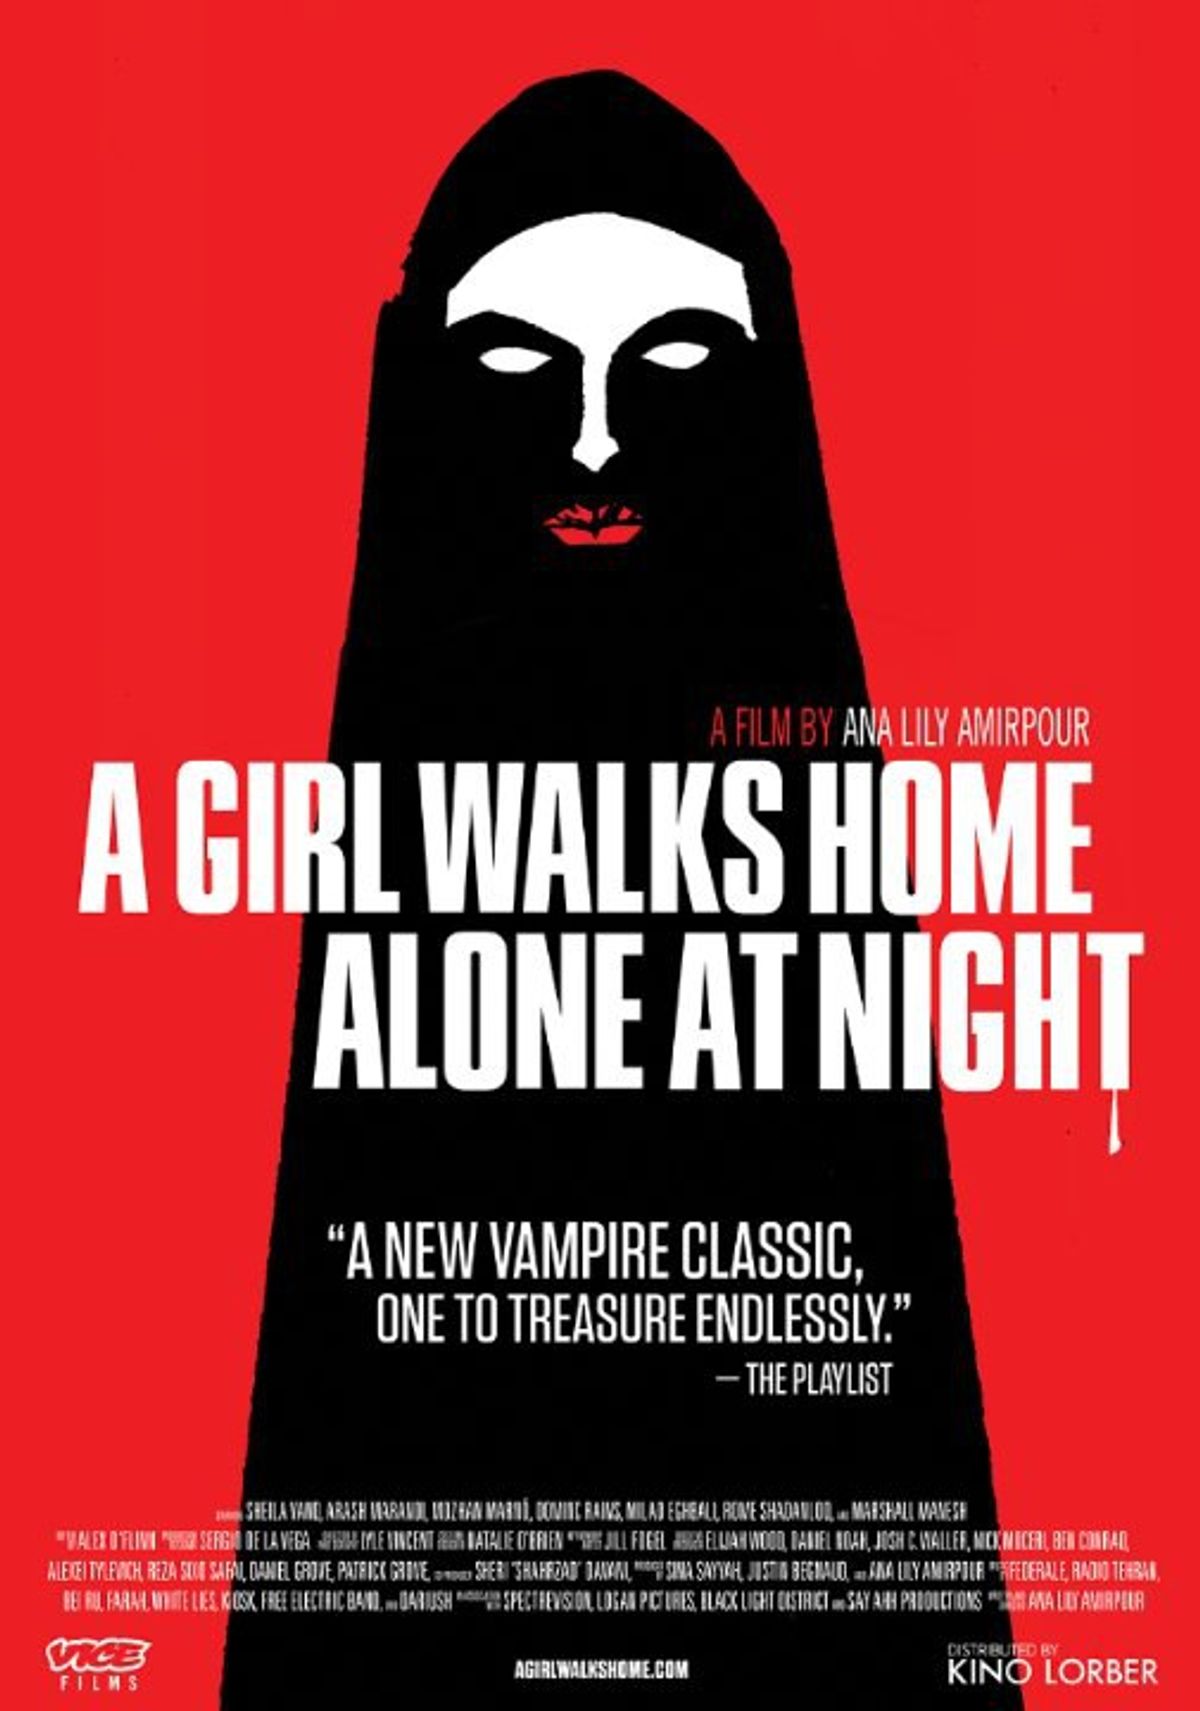 Let's Talk Film! A Girl Walks Home Alone At Night (2014)